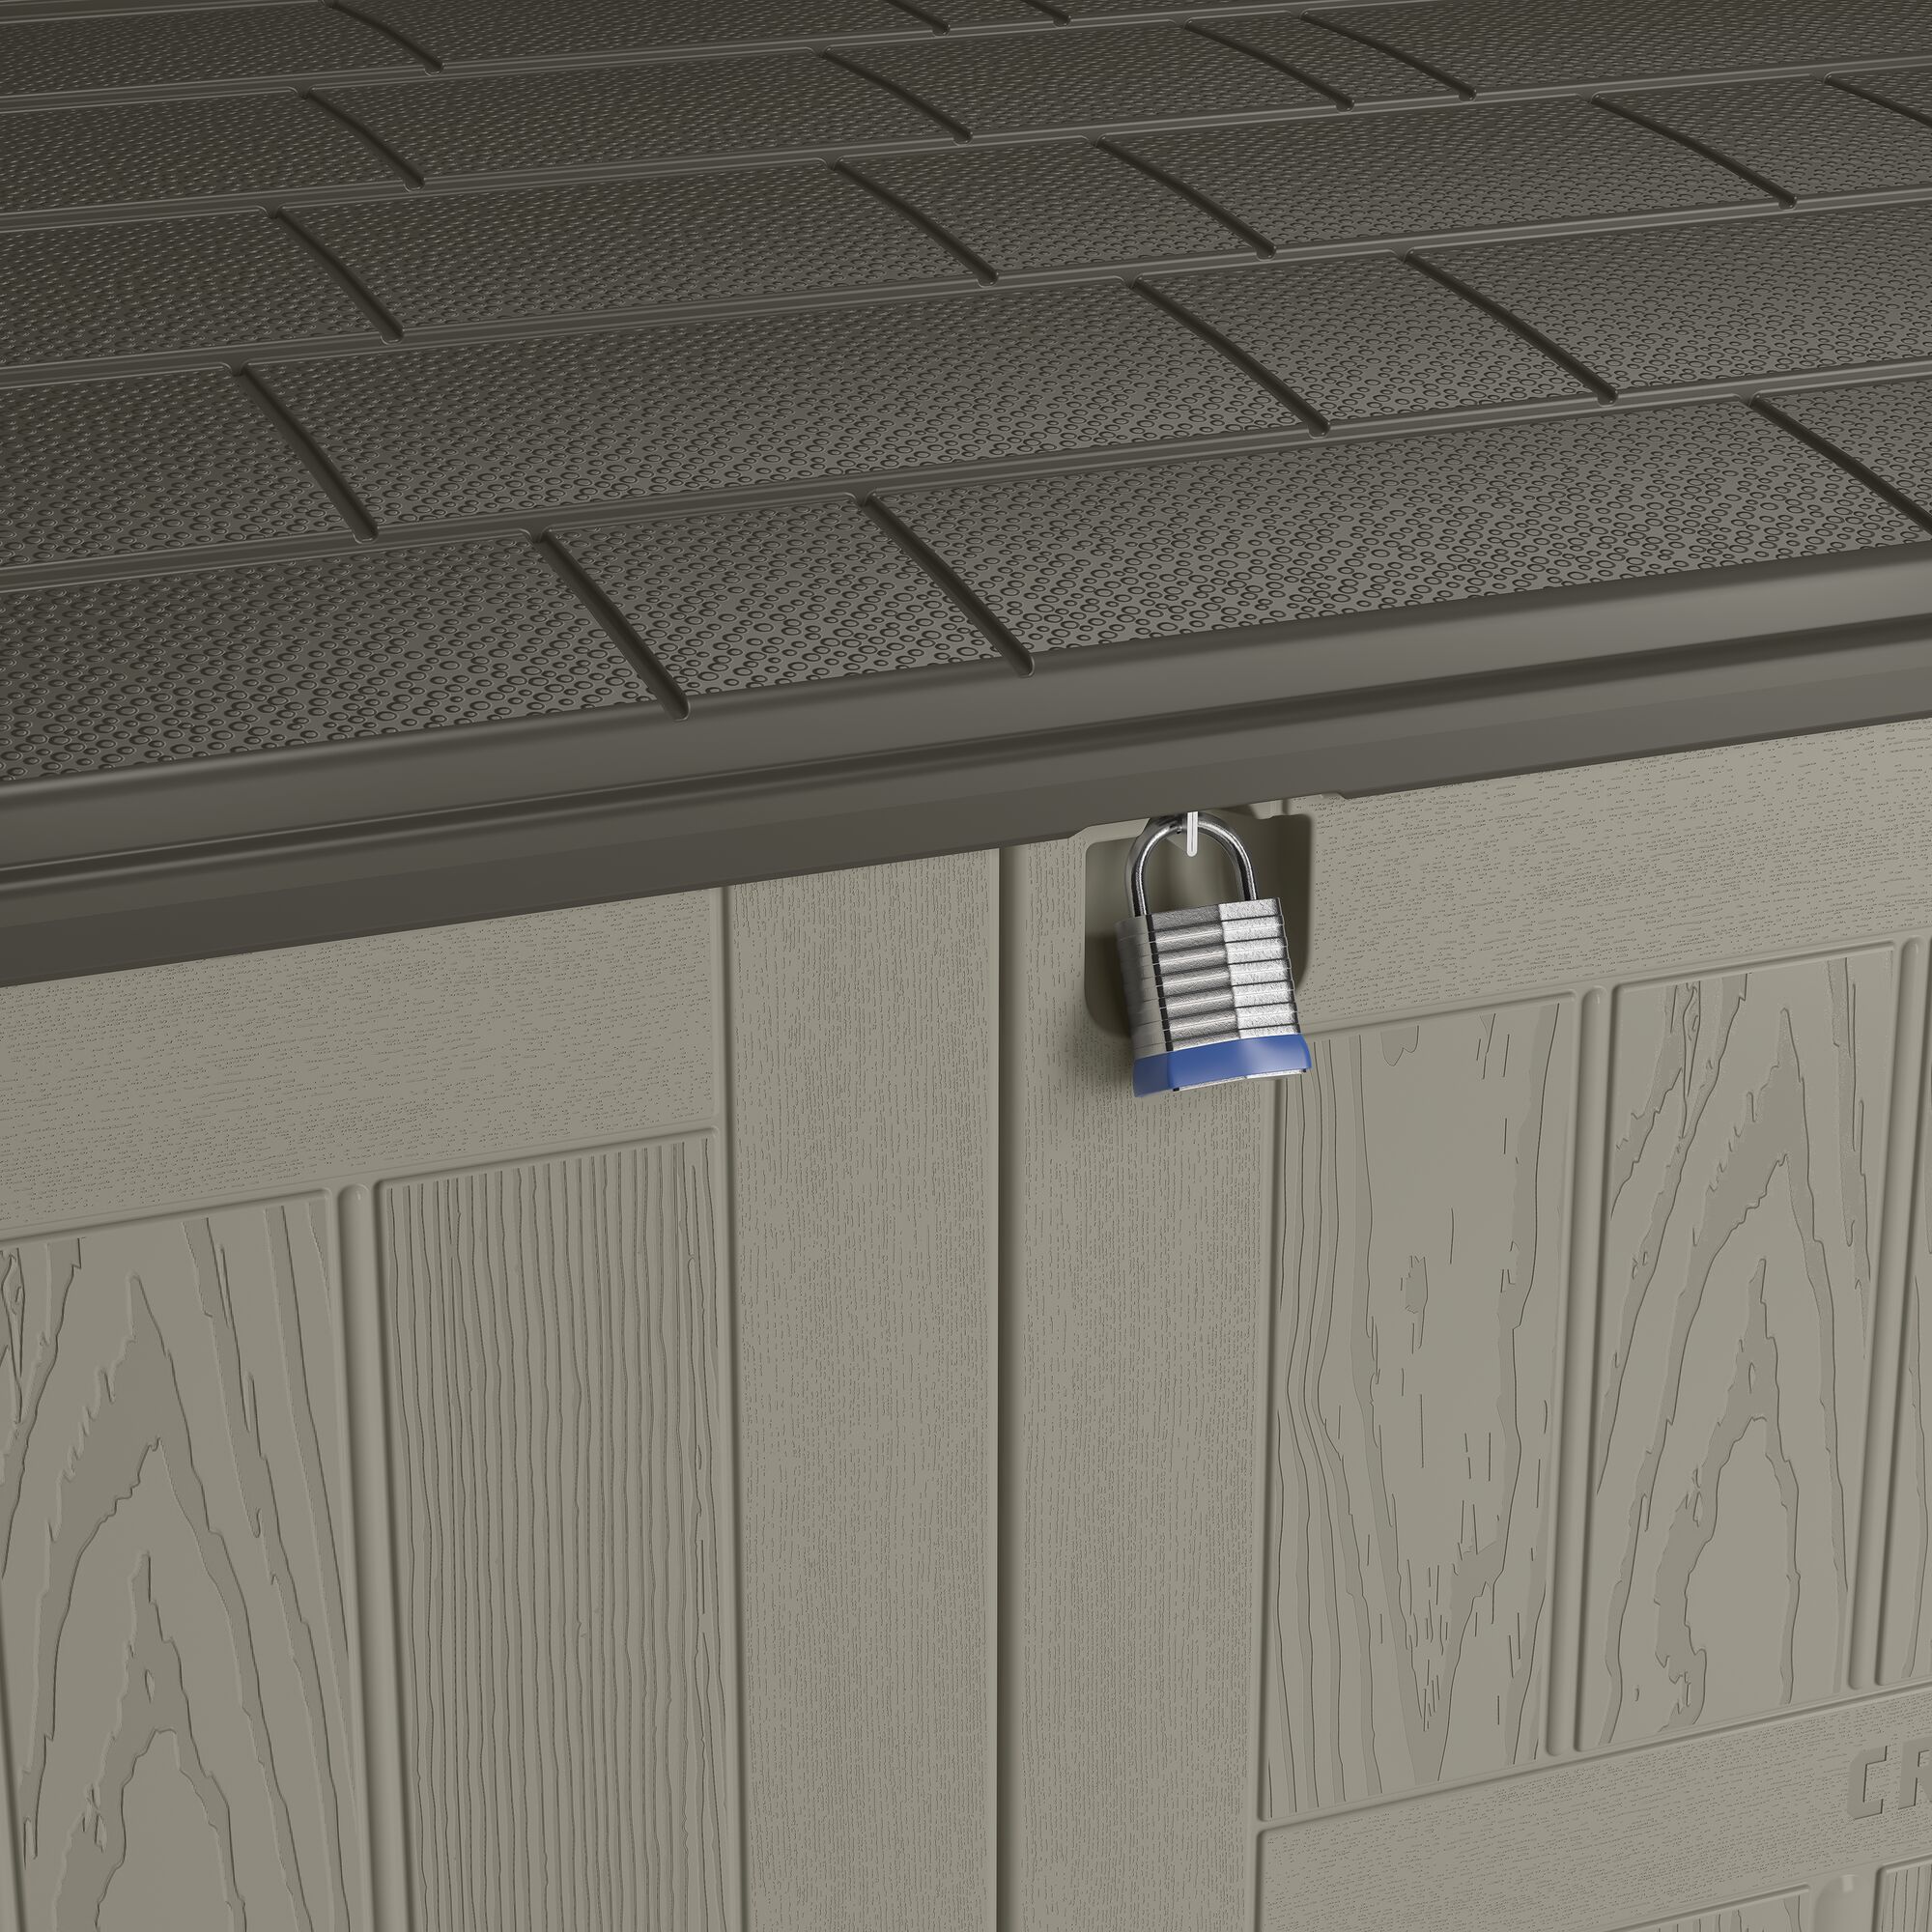 Lock feature of a horizontal storage shed.